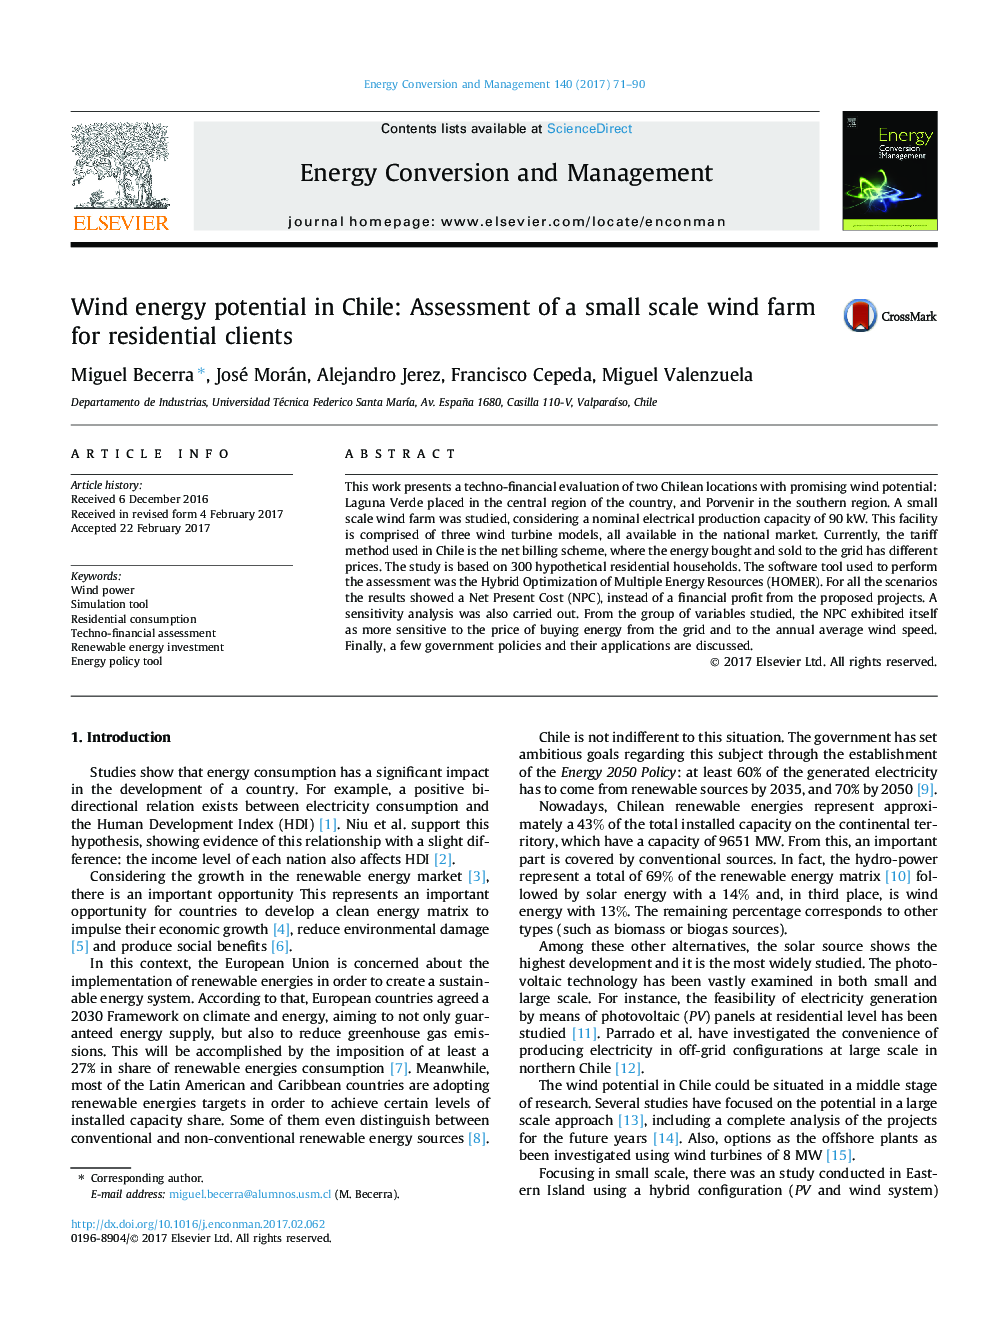 Wind energy potential in Chile: Assessment of a small scale wind farm for residential clients